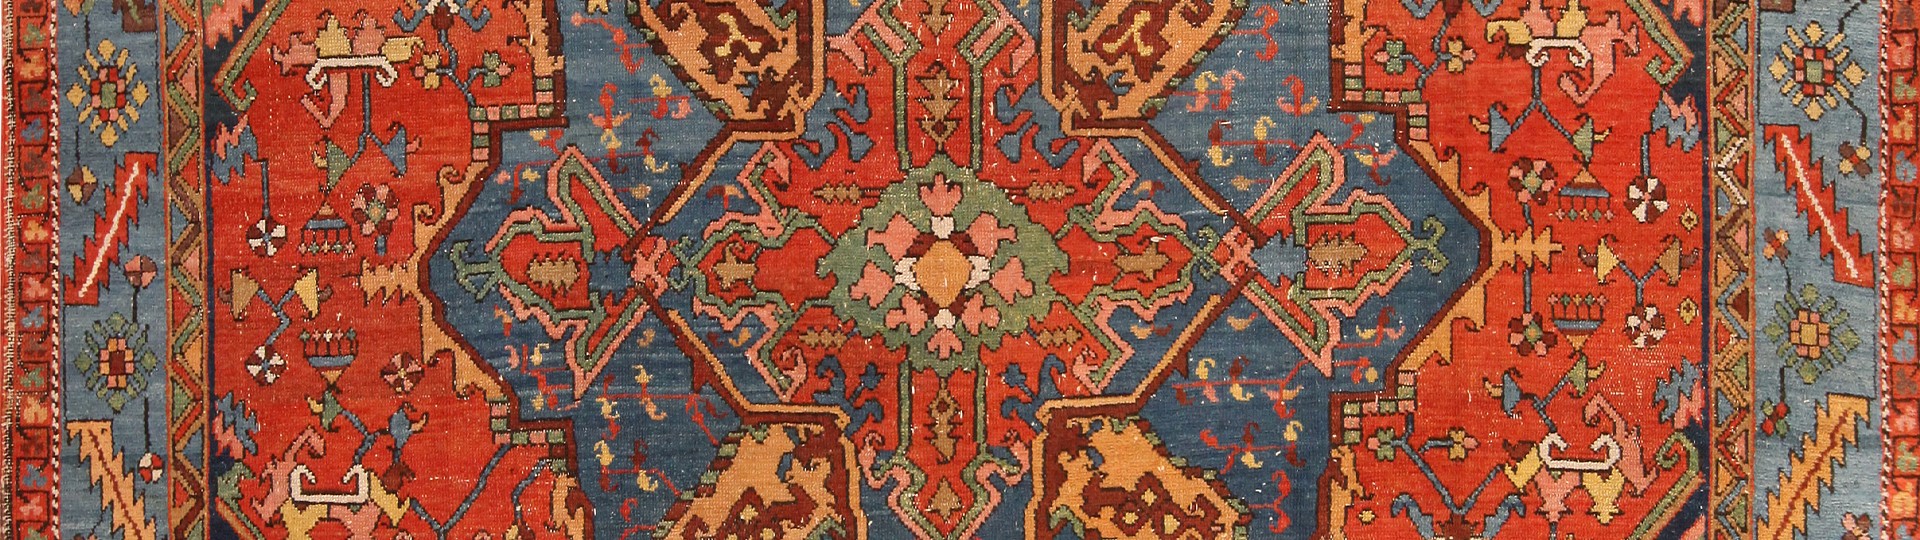 Sunday June 12th Antique, Vintage & Modern Rug Auction by Nazmiyal Auction